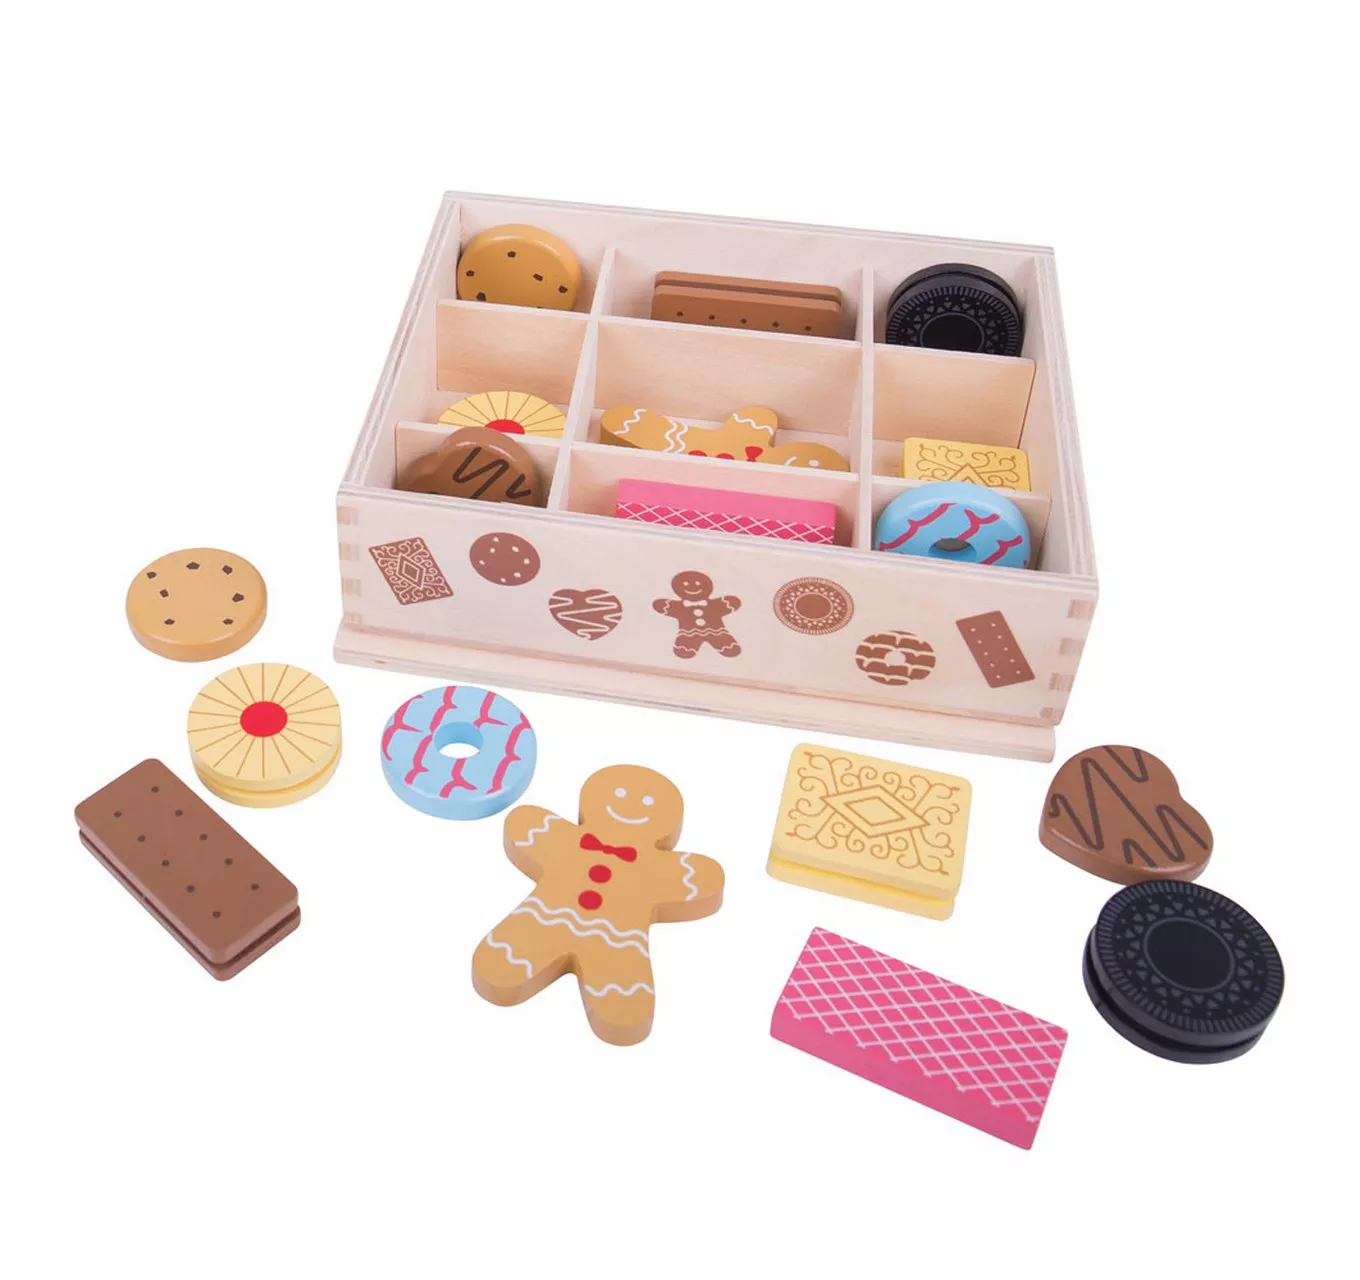 Box of Biscuits Set